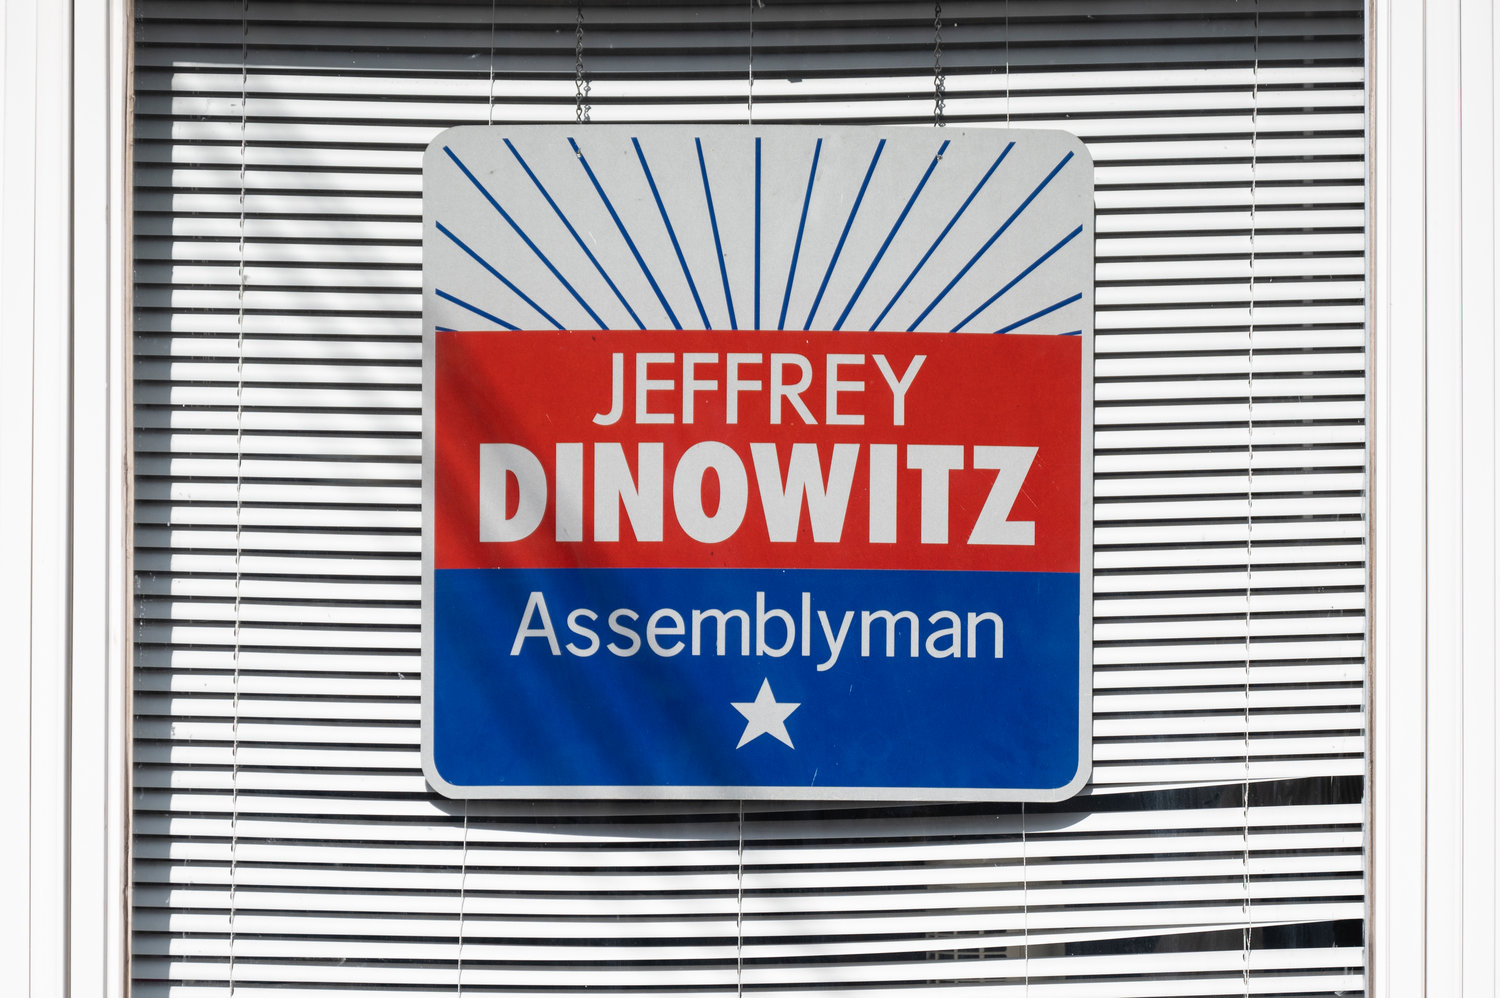 Assemblyman Jeffrey Dinowitz says the idea that party machines like the Bronx Democrats he helps lead benefit from special elections is absurd. However, Manhattan College political science professor Margaret Groarke says special election are a common tactic used by party machines to more easily land their preferred candidate in office.